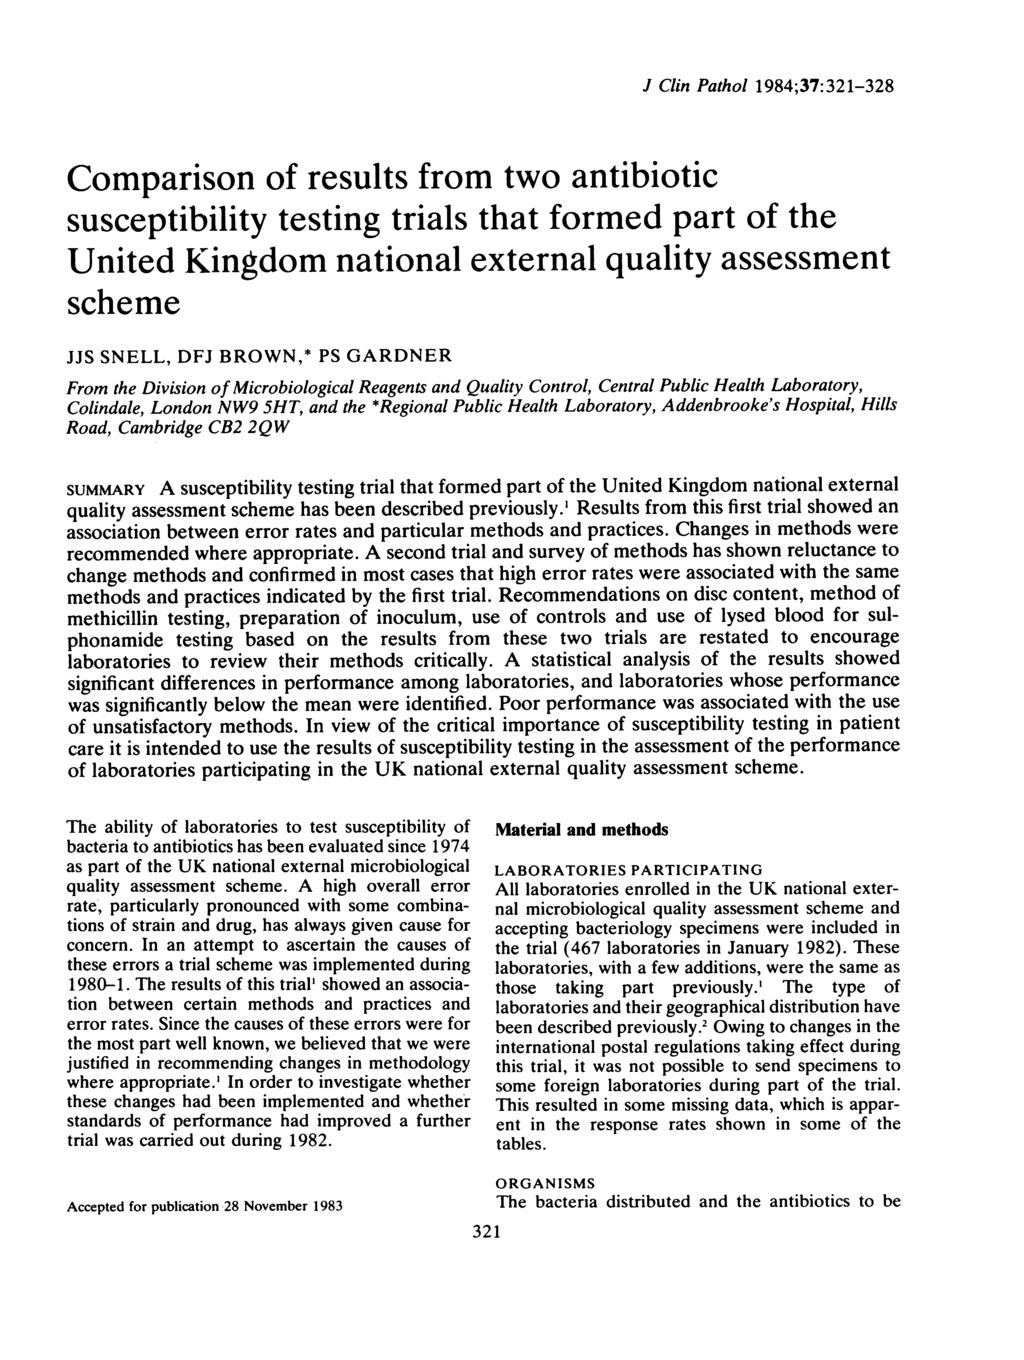 J Clin Pathol 1984;37:321-328 Comparison of results from two antibiotic susceptibility testing trials that formed part of the United Kingdom national external quality assessment scheme JJS SNELL, DFJ